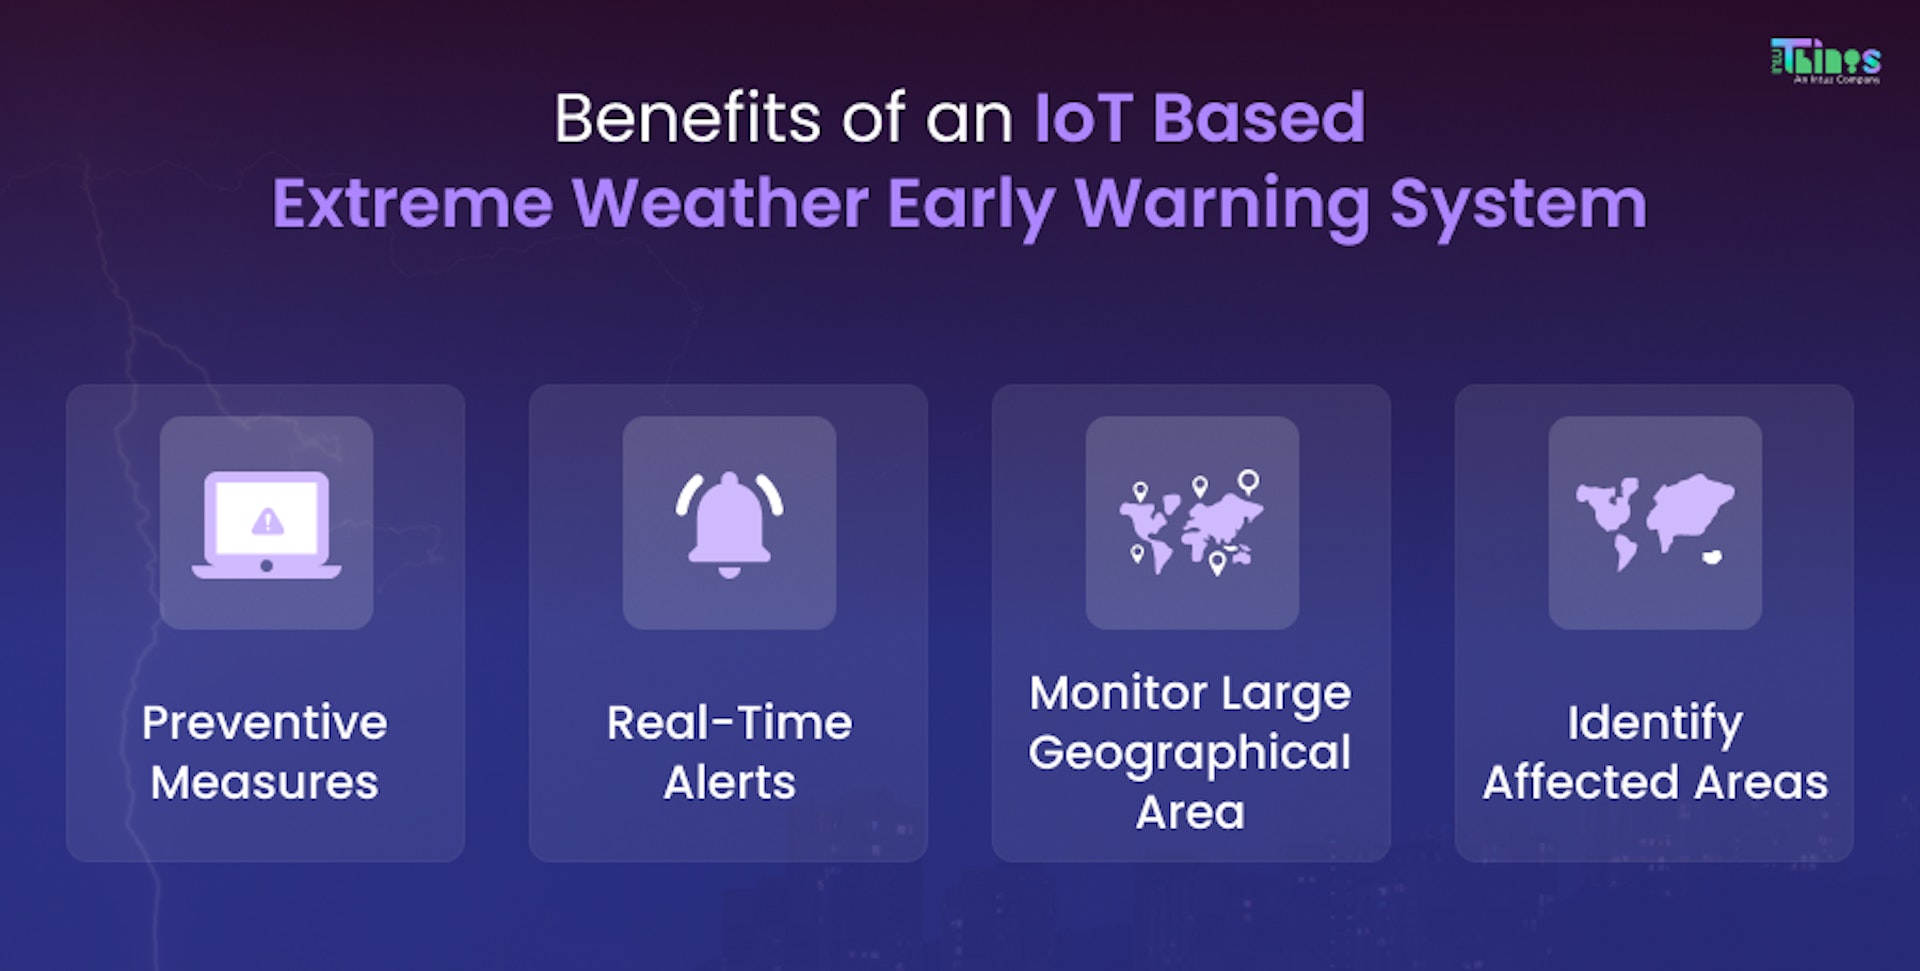 Benefits of IoT based extreme weather early warning system